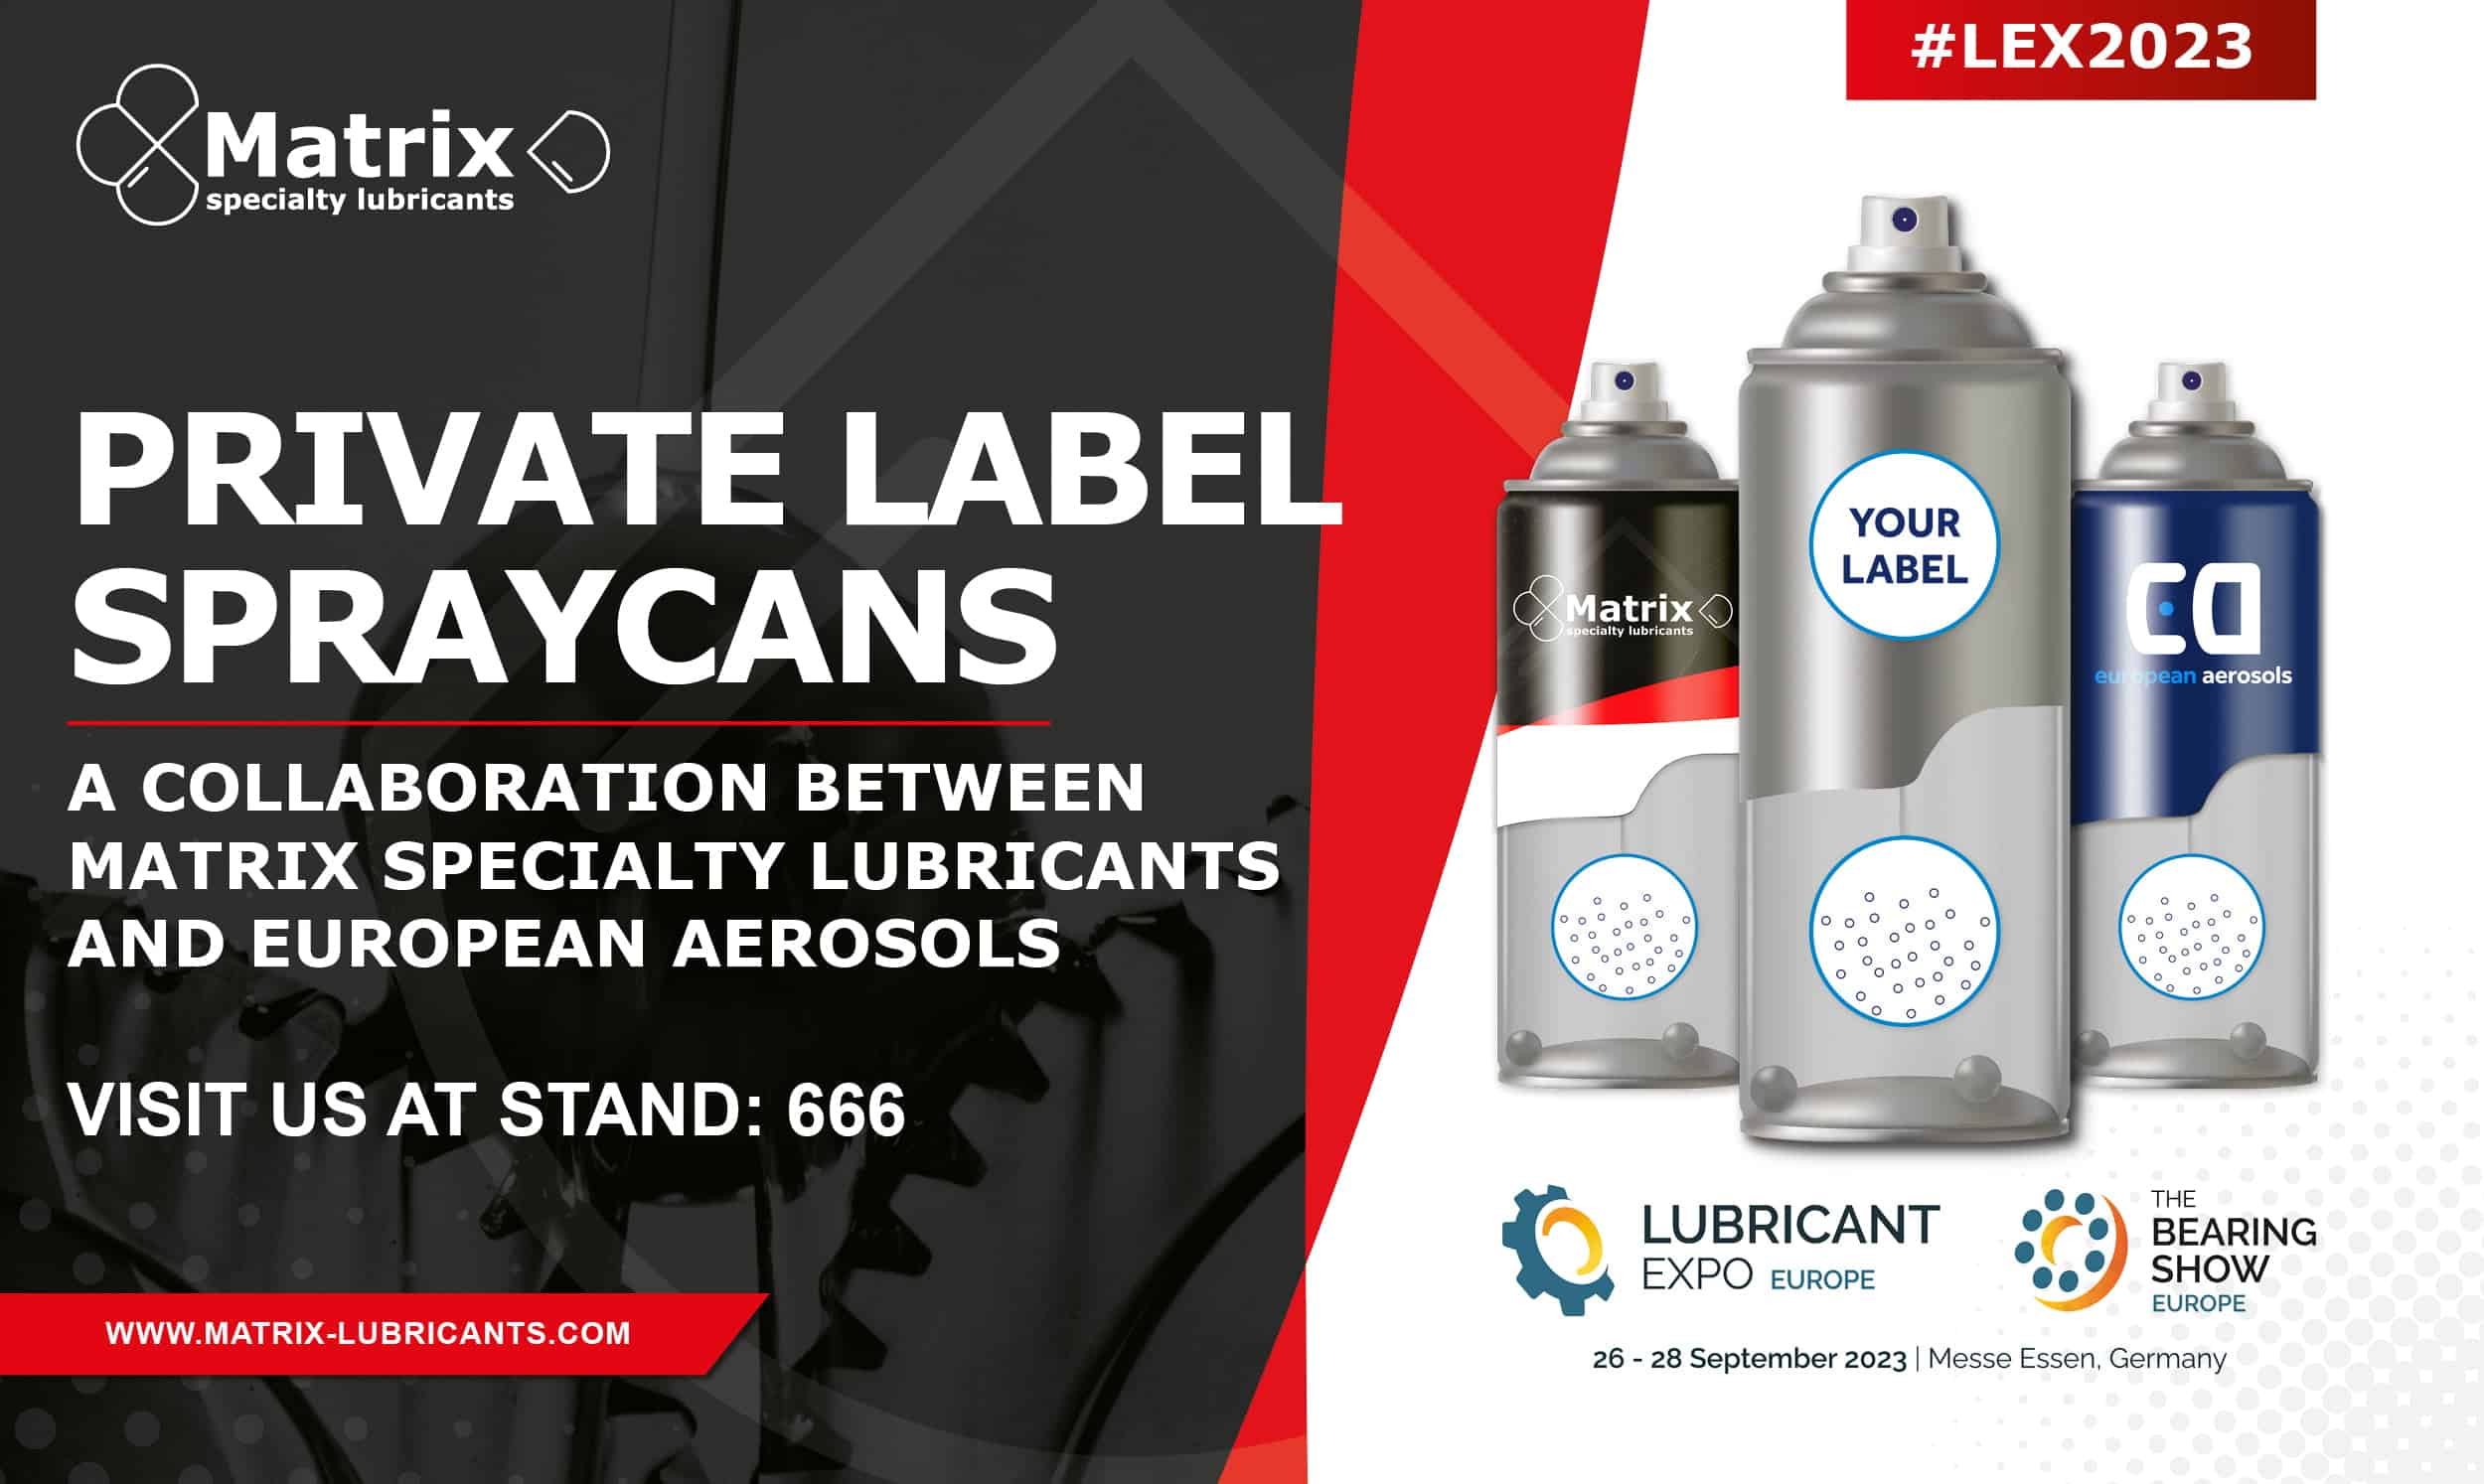 Matrix specialty lubricants' private label spray cans collaboration with European aerosols, showcasing at Lubricant Expo Europe 2023